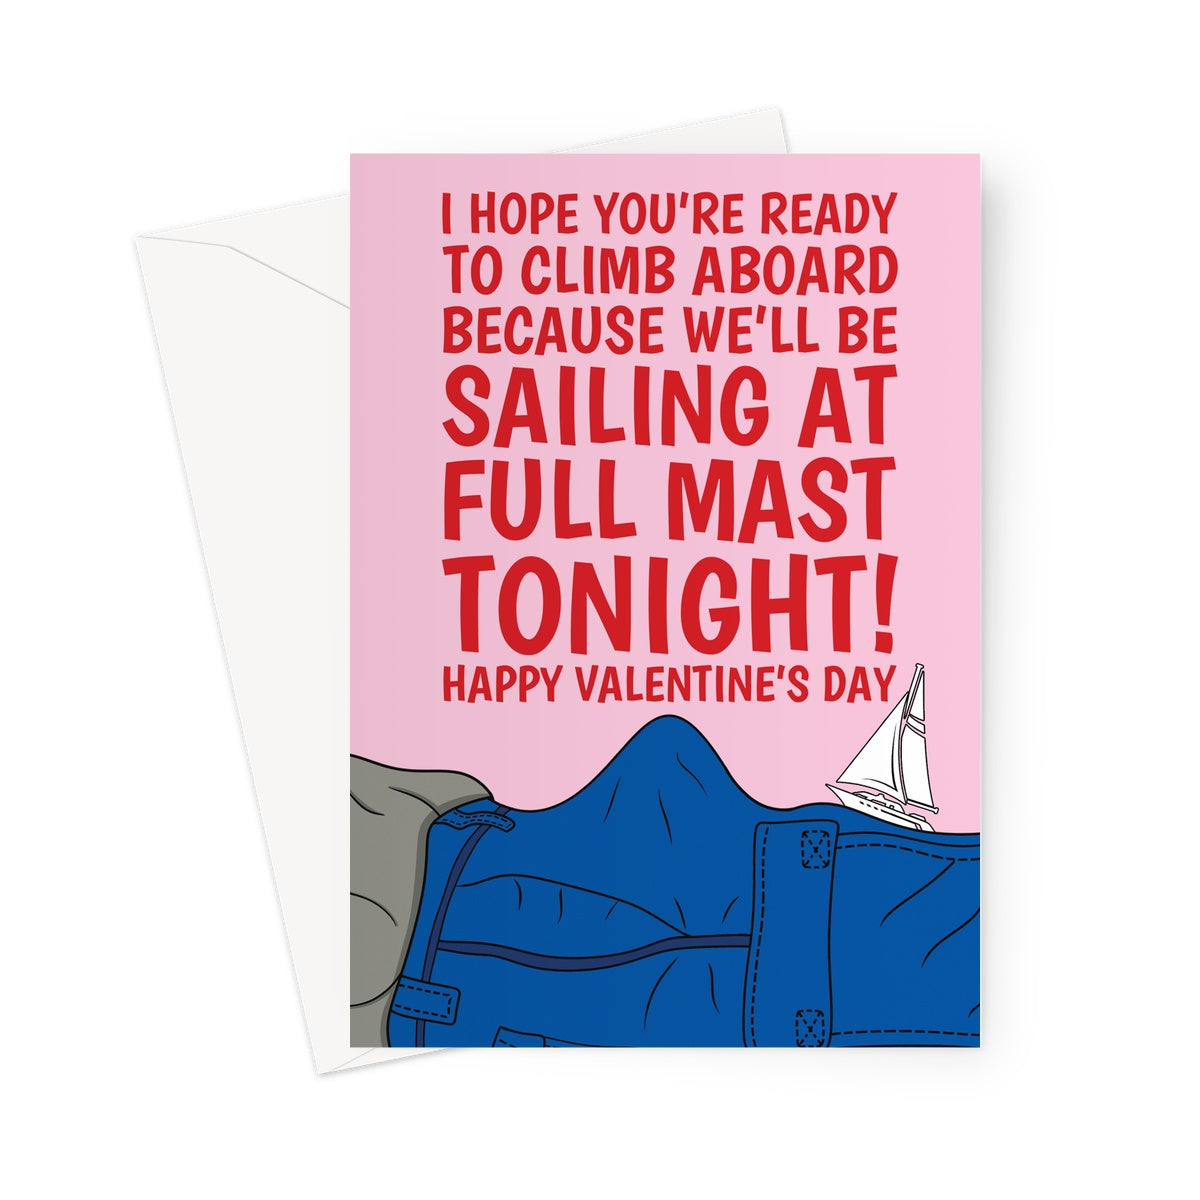 Naughty Valentine's Day Card For Her - Sailing At Full Mast